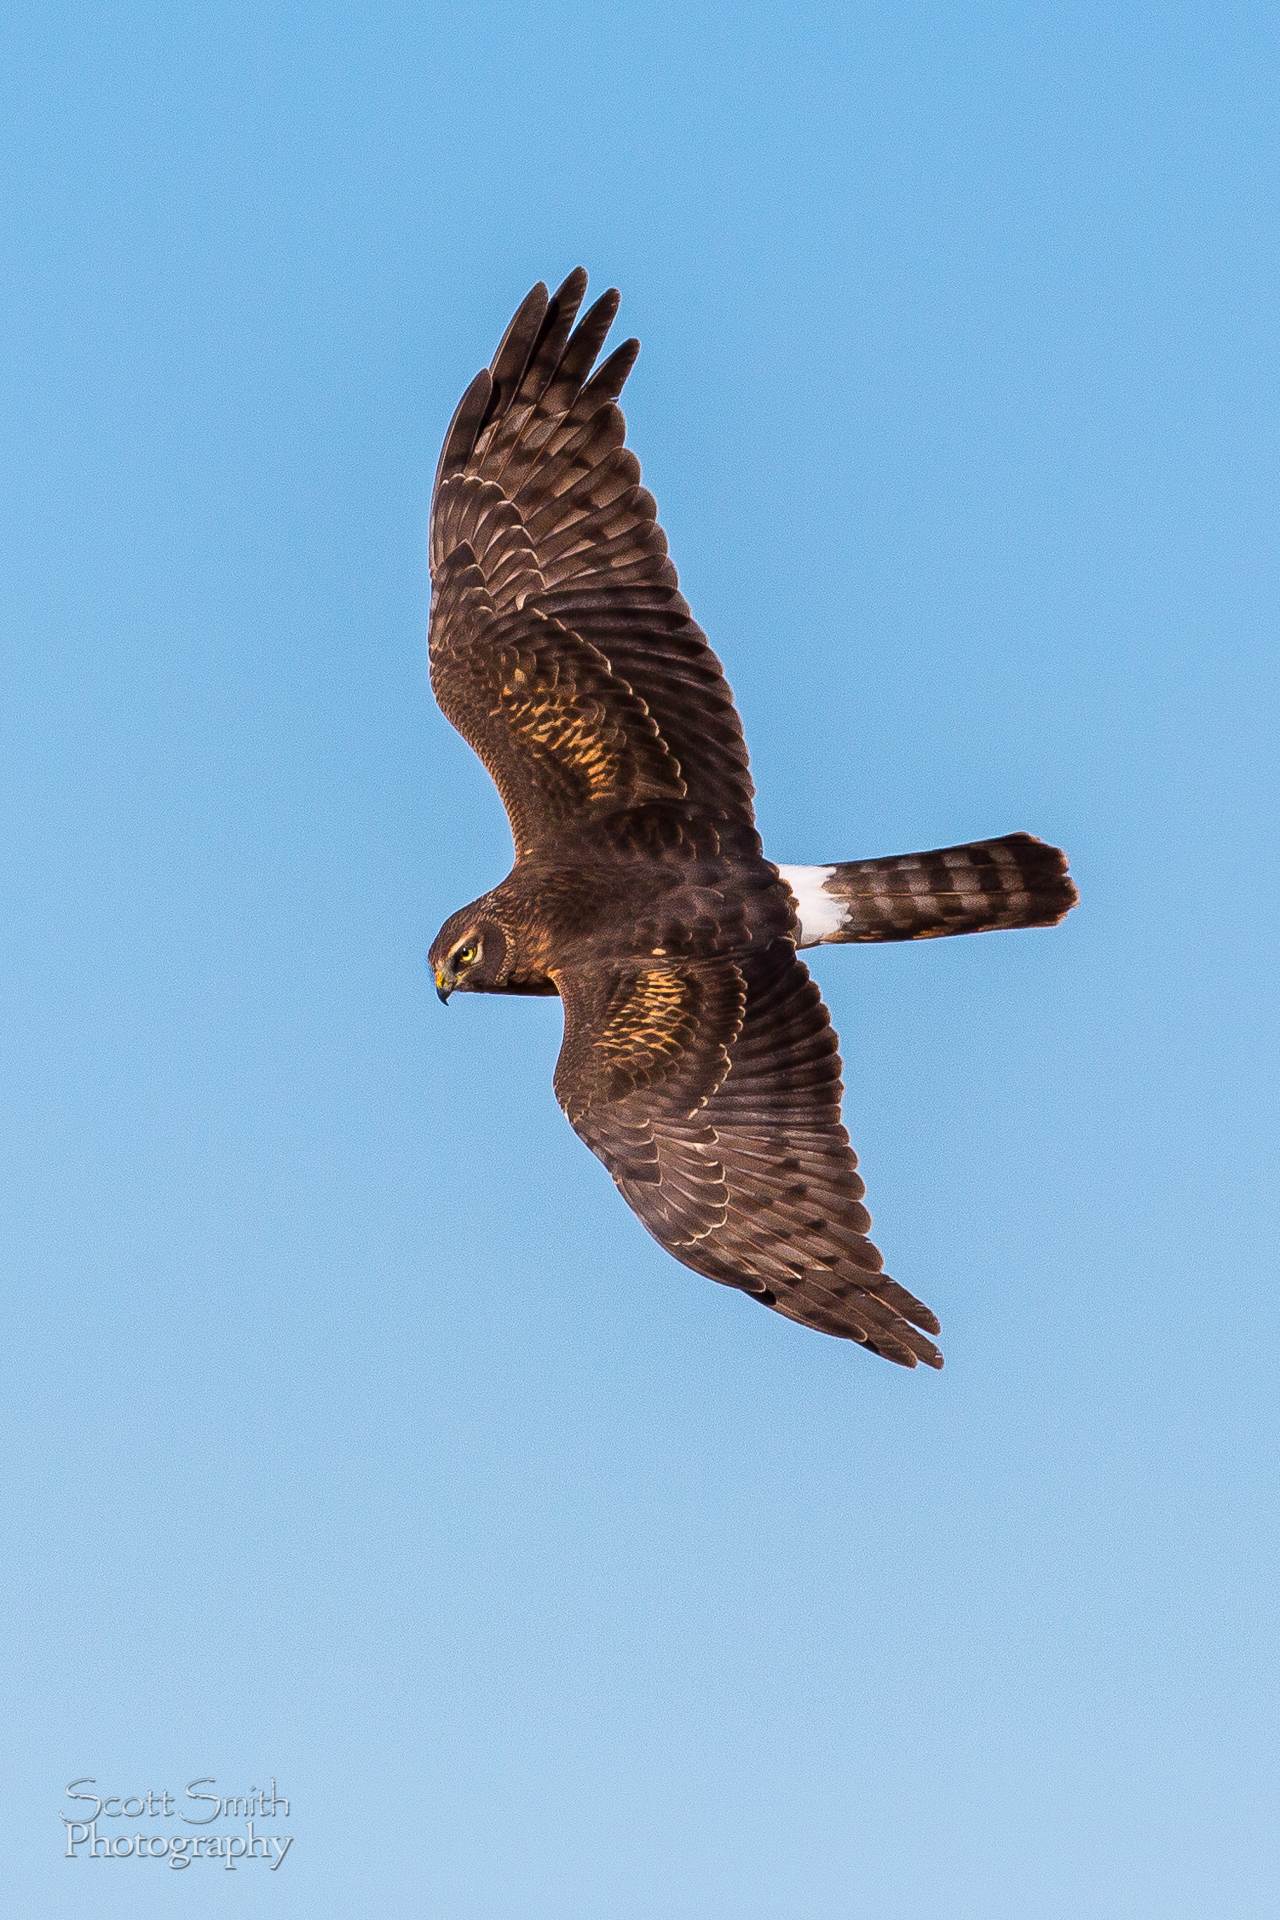 Marsh Hawk II - A marsh hawk soaring over the grasslands at the Rocky Mountain Arsenal Wildlife Refuge. by Scott Smith Photos